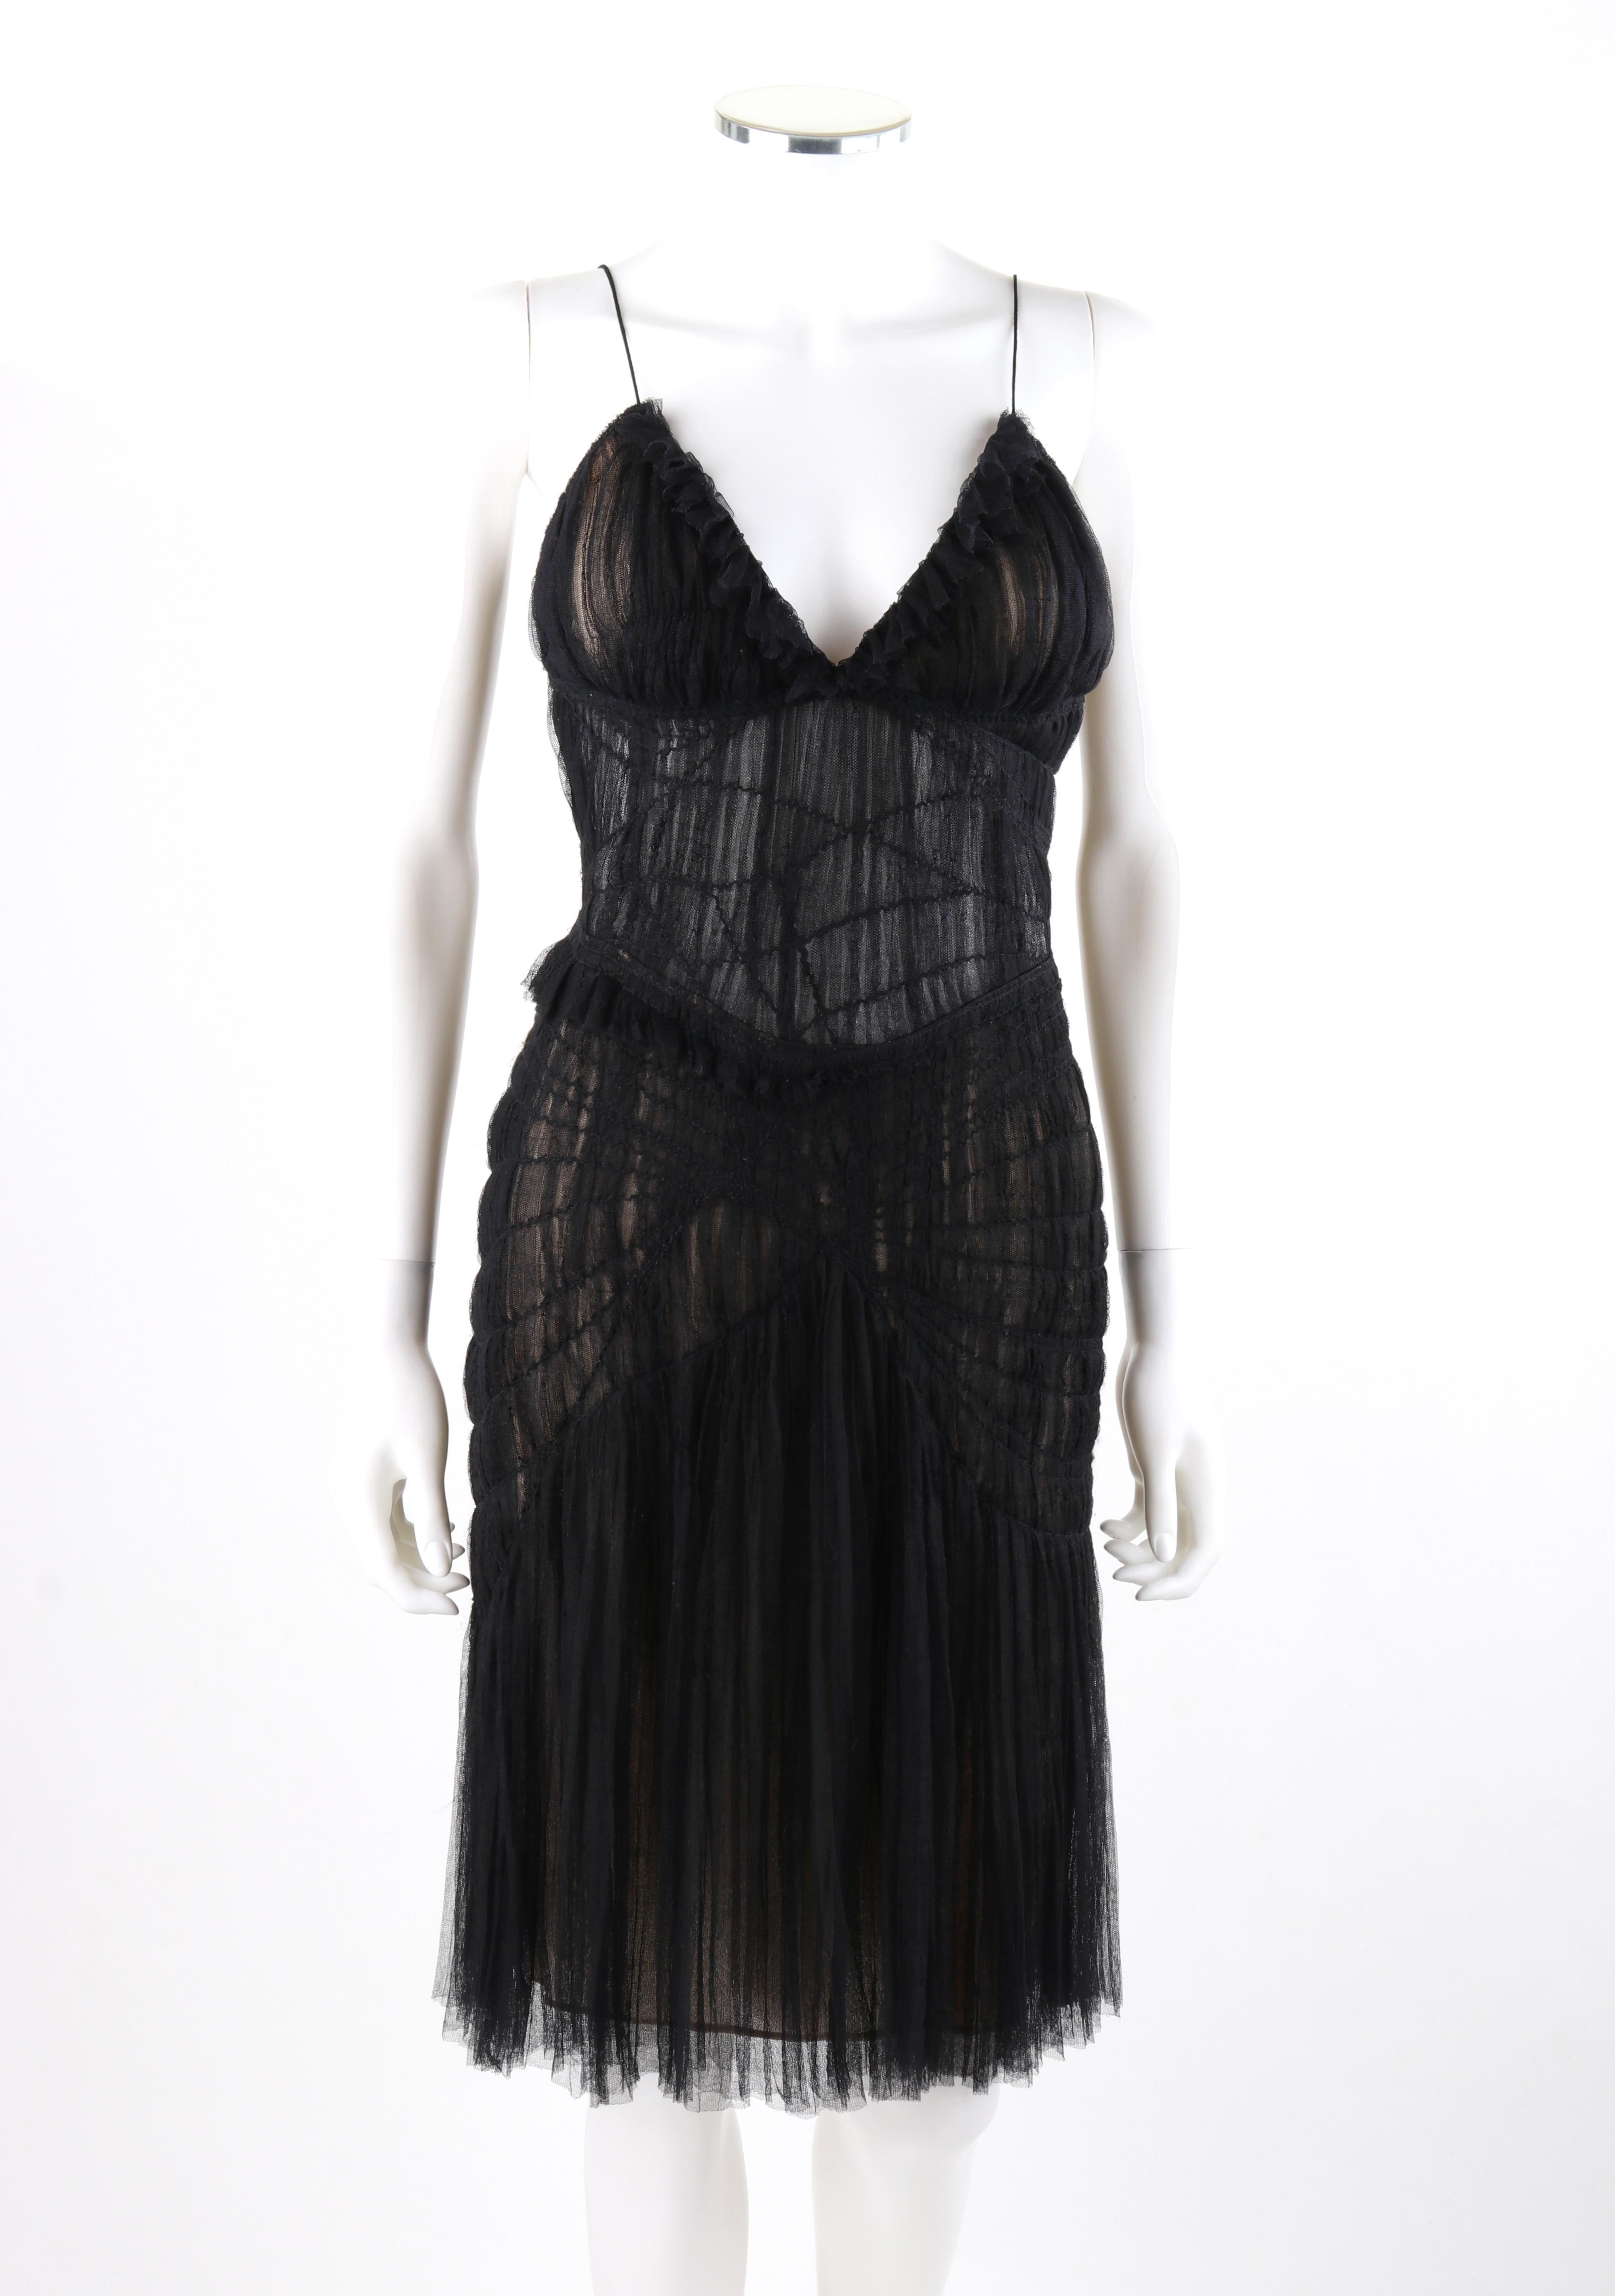 ALEXANDER McQUEEN S/S 2003 “Irere” Black Gathered Layer Tulle Mesh V Neck Dress


Brand / Manufacturer: Alexander McQueen
Collection: S/S 2003 “Irere”
Designer: Alexander McQueen
Style: Spaghetti strap gathered tulle mesh dress
Color(s): Shades of